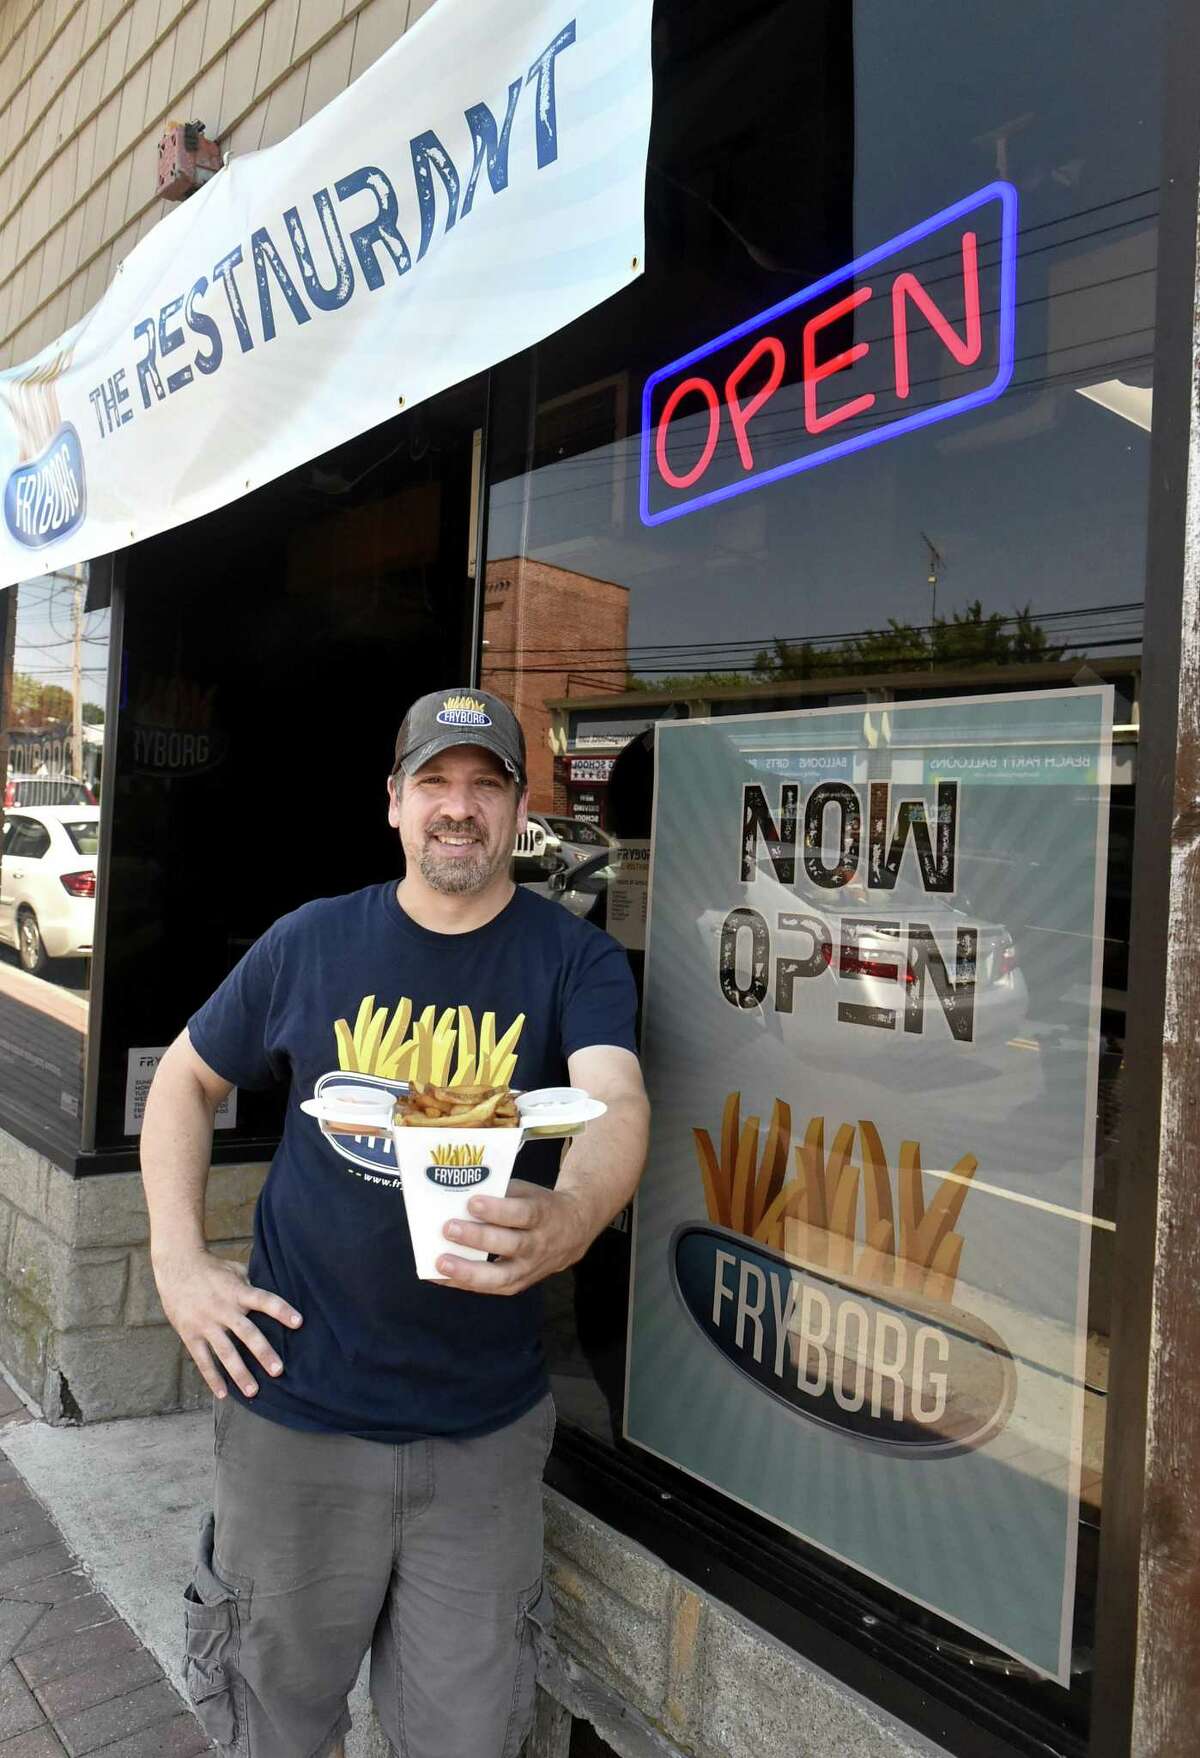 Milford, Connecticut - Friday, August 24, 2018: Jonathan Gibbons, owner of Fryborg in Milford, an eclectic eatery featuring hand-cut french fries as the main attraction with variation of flavorings and dipping sauces on a menu that also includes sandwiches, in front of his restaurant on Bridgeport Ave.